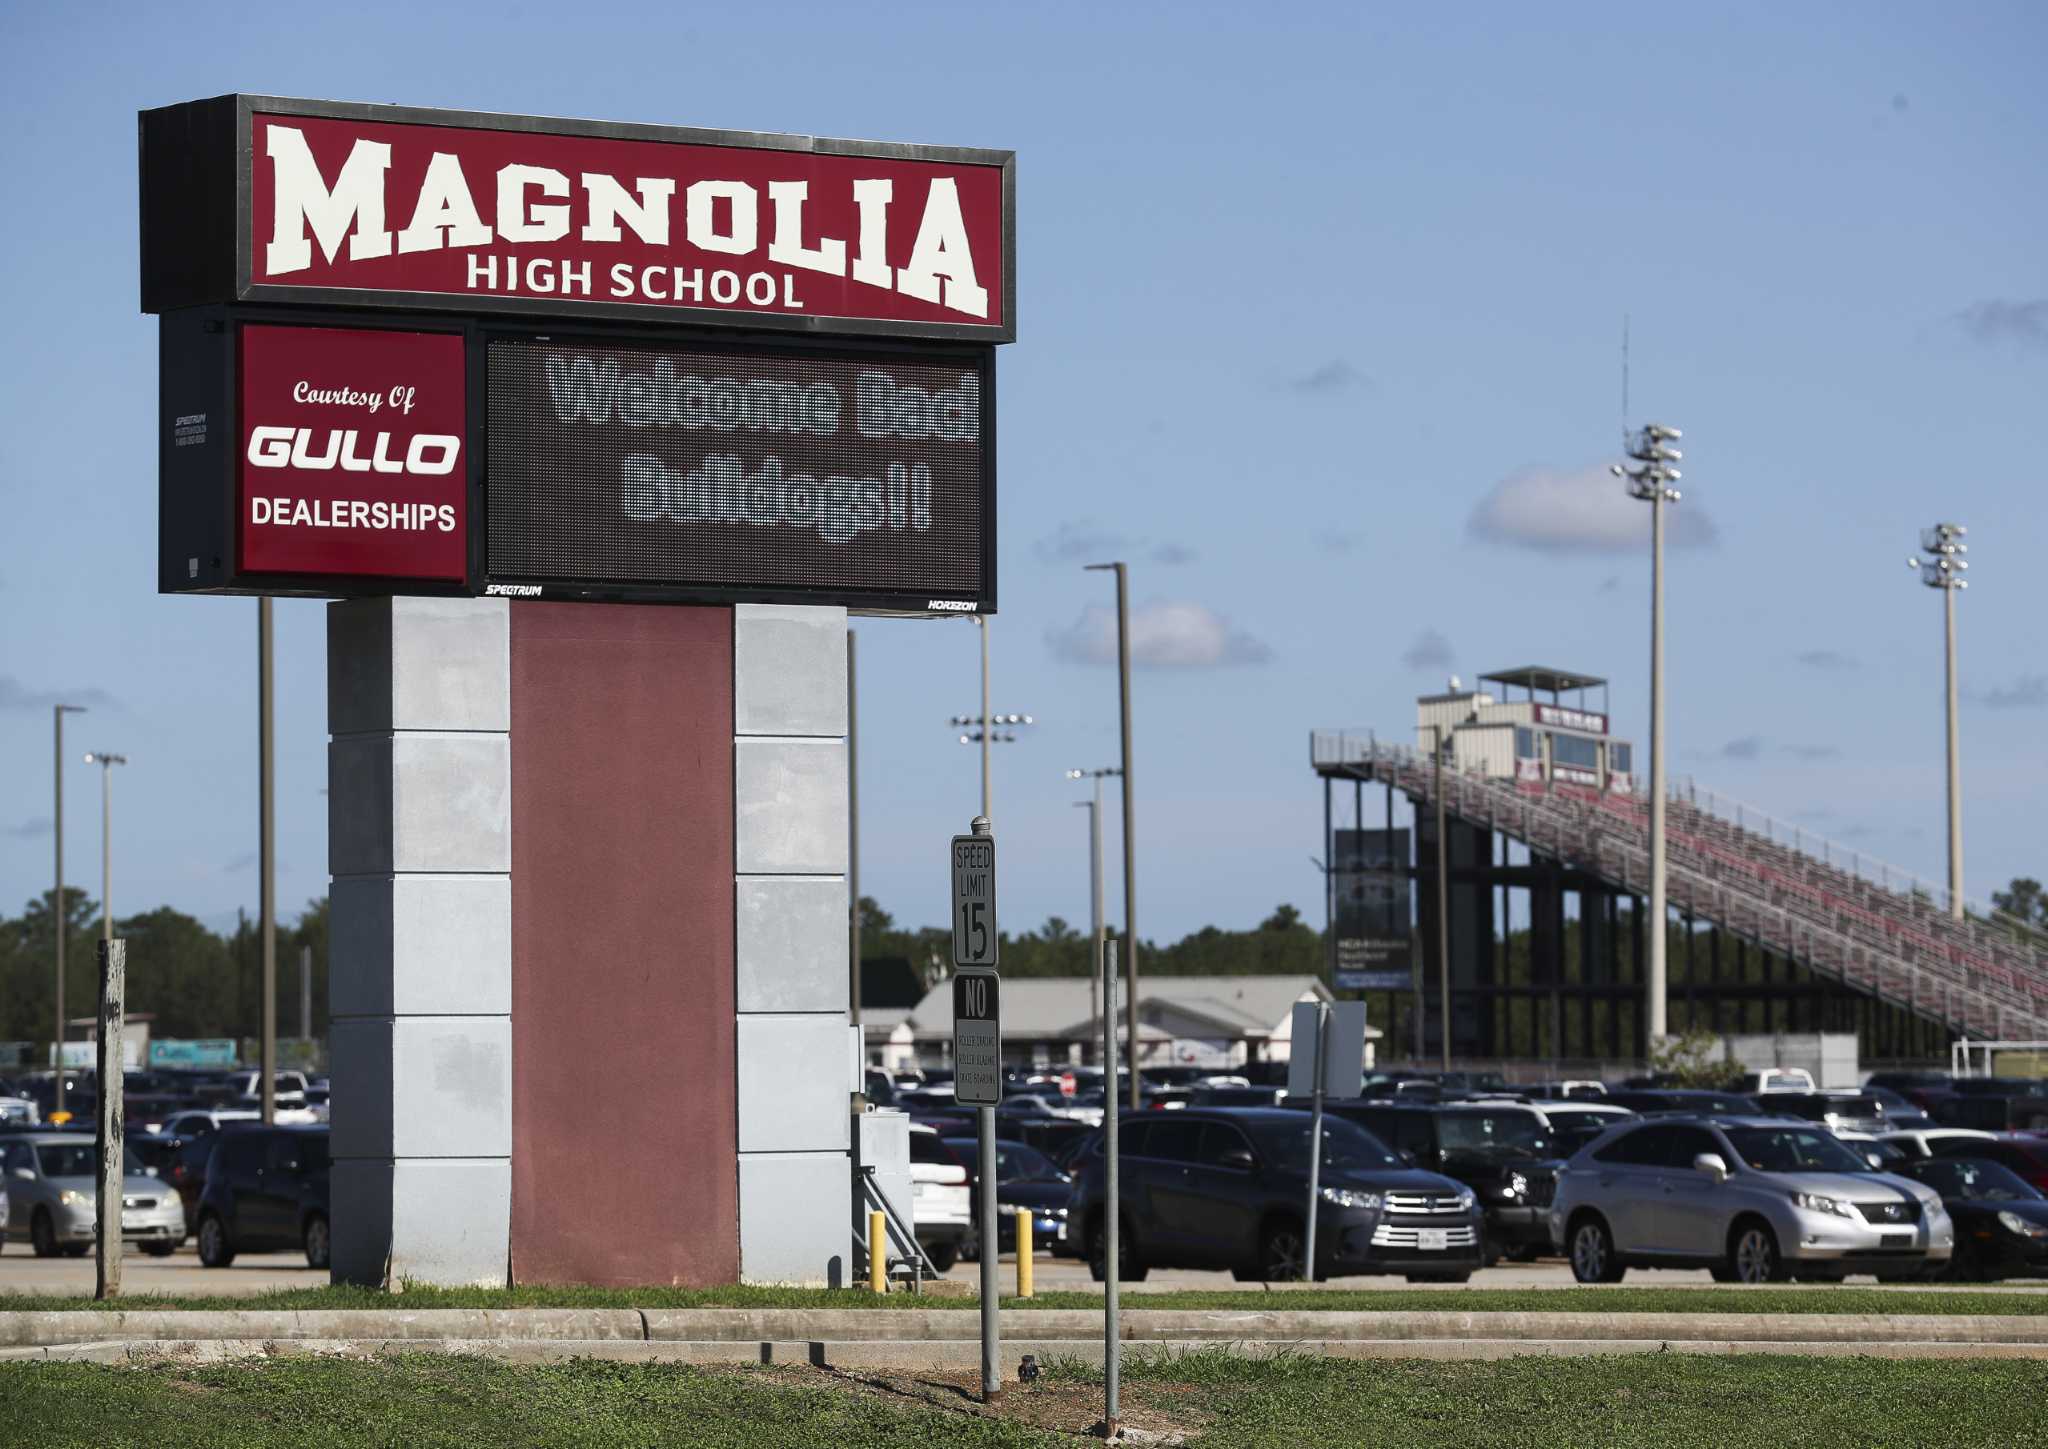 New facilities, renovations set for Magnolia ISD with 228M in bond funding